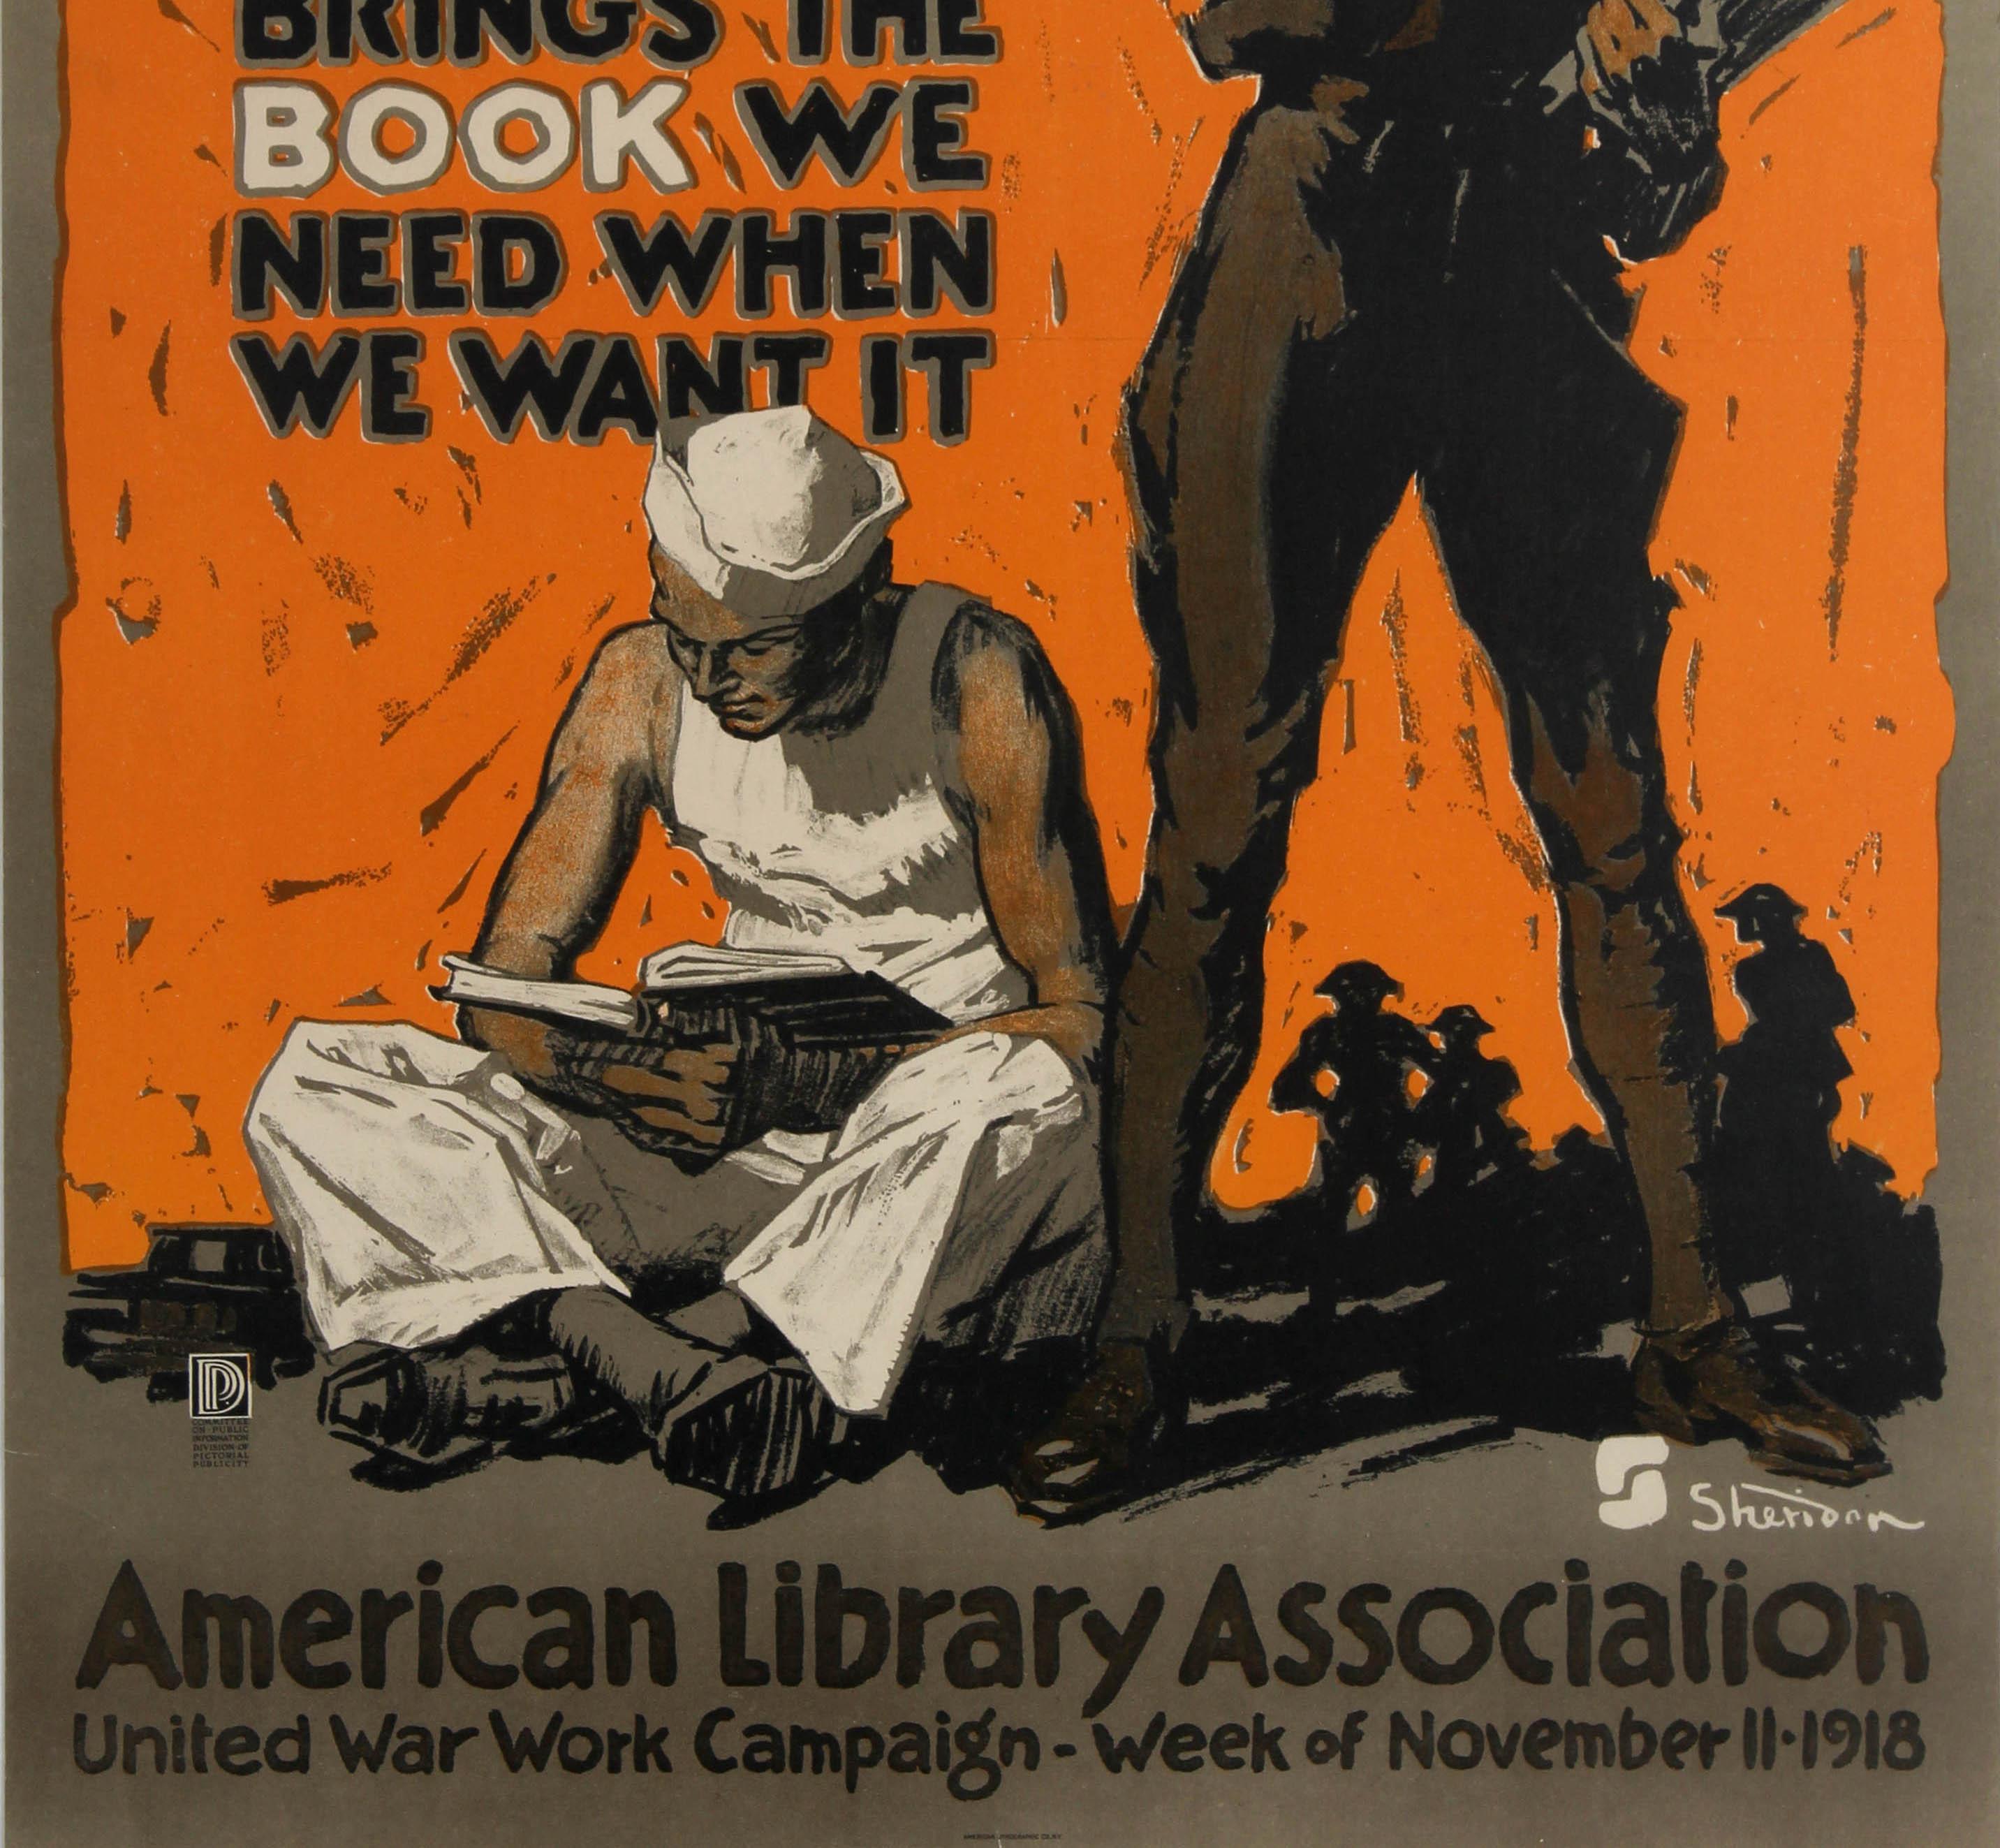 Original vintage World War One poster: Hey fellows! Your money brings the book we need when we want it. American Library Association - United War Work Campaign - Week of November 11 1918. Bold and colourful image on a vivid orange background showing